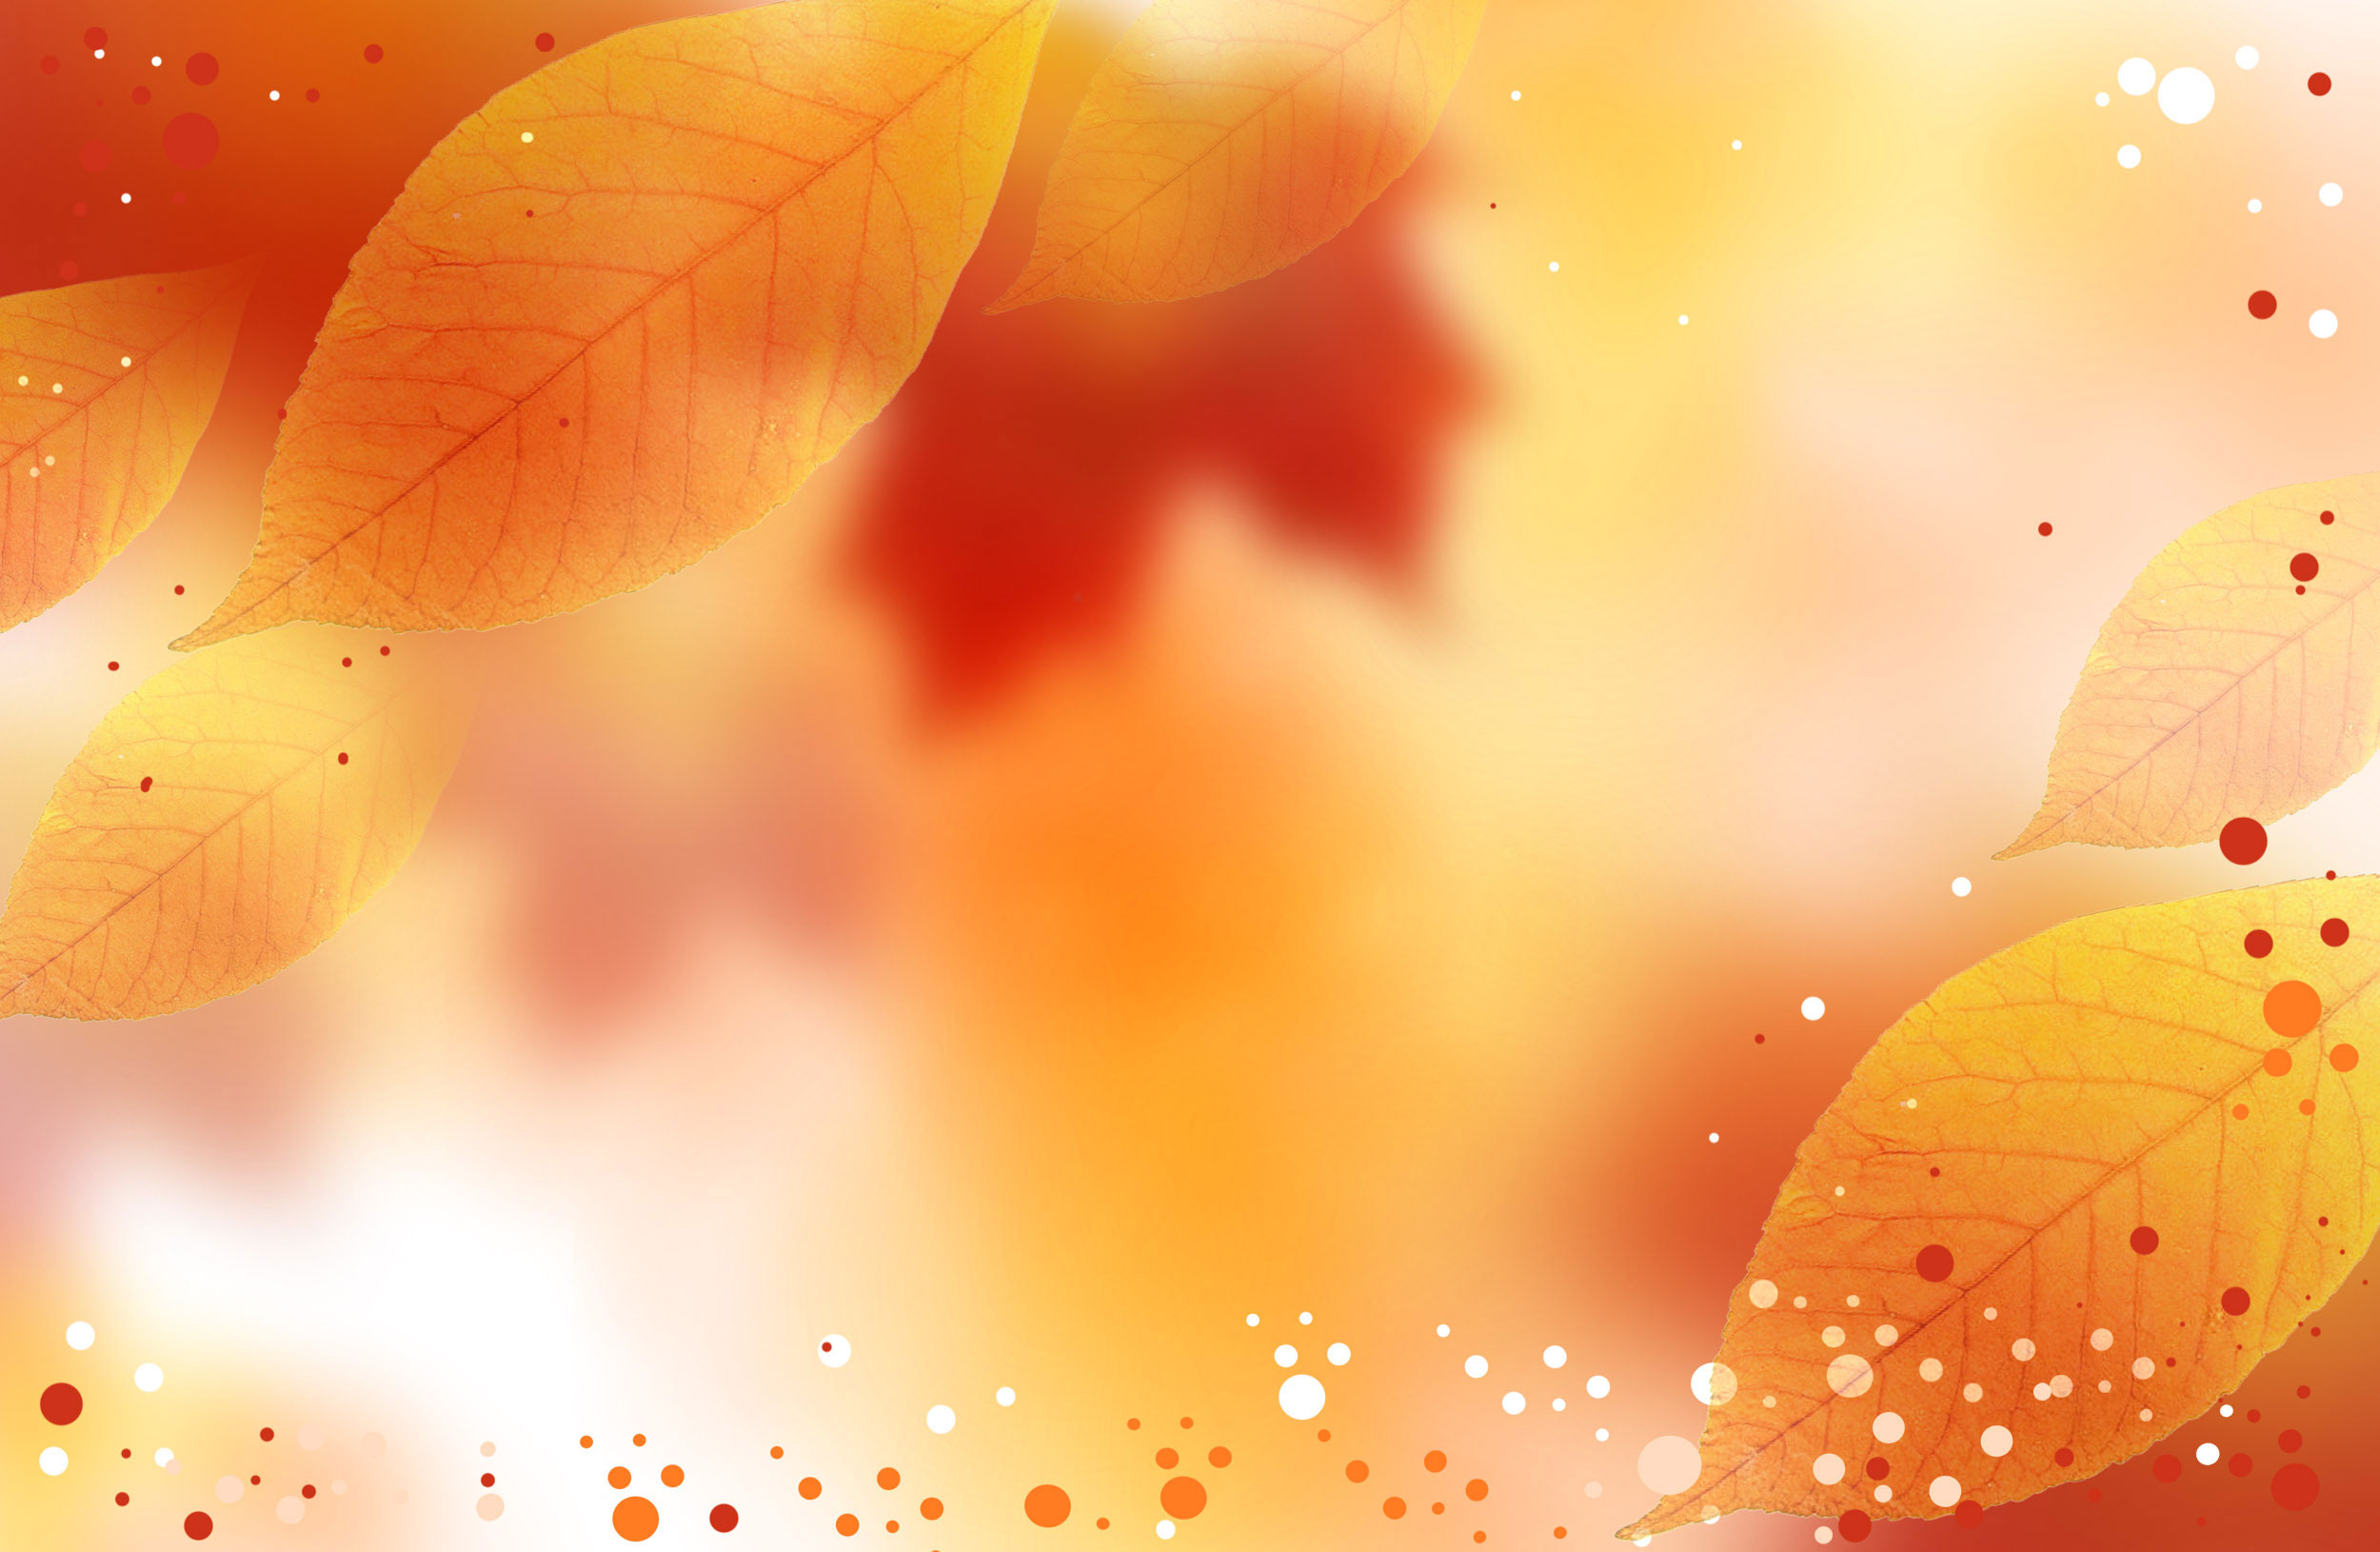 Background images fall